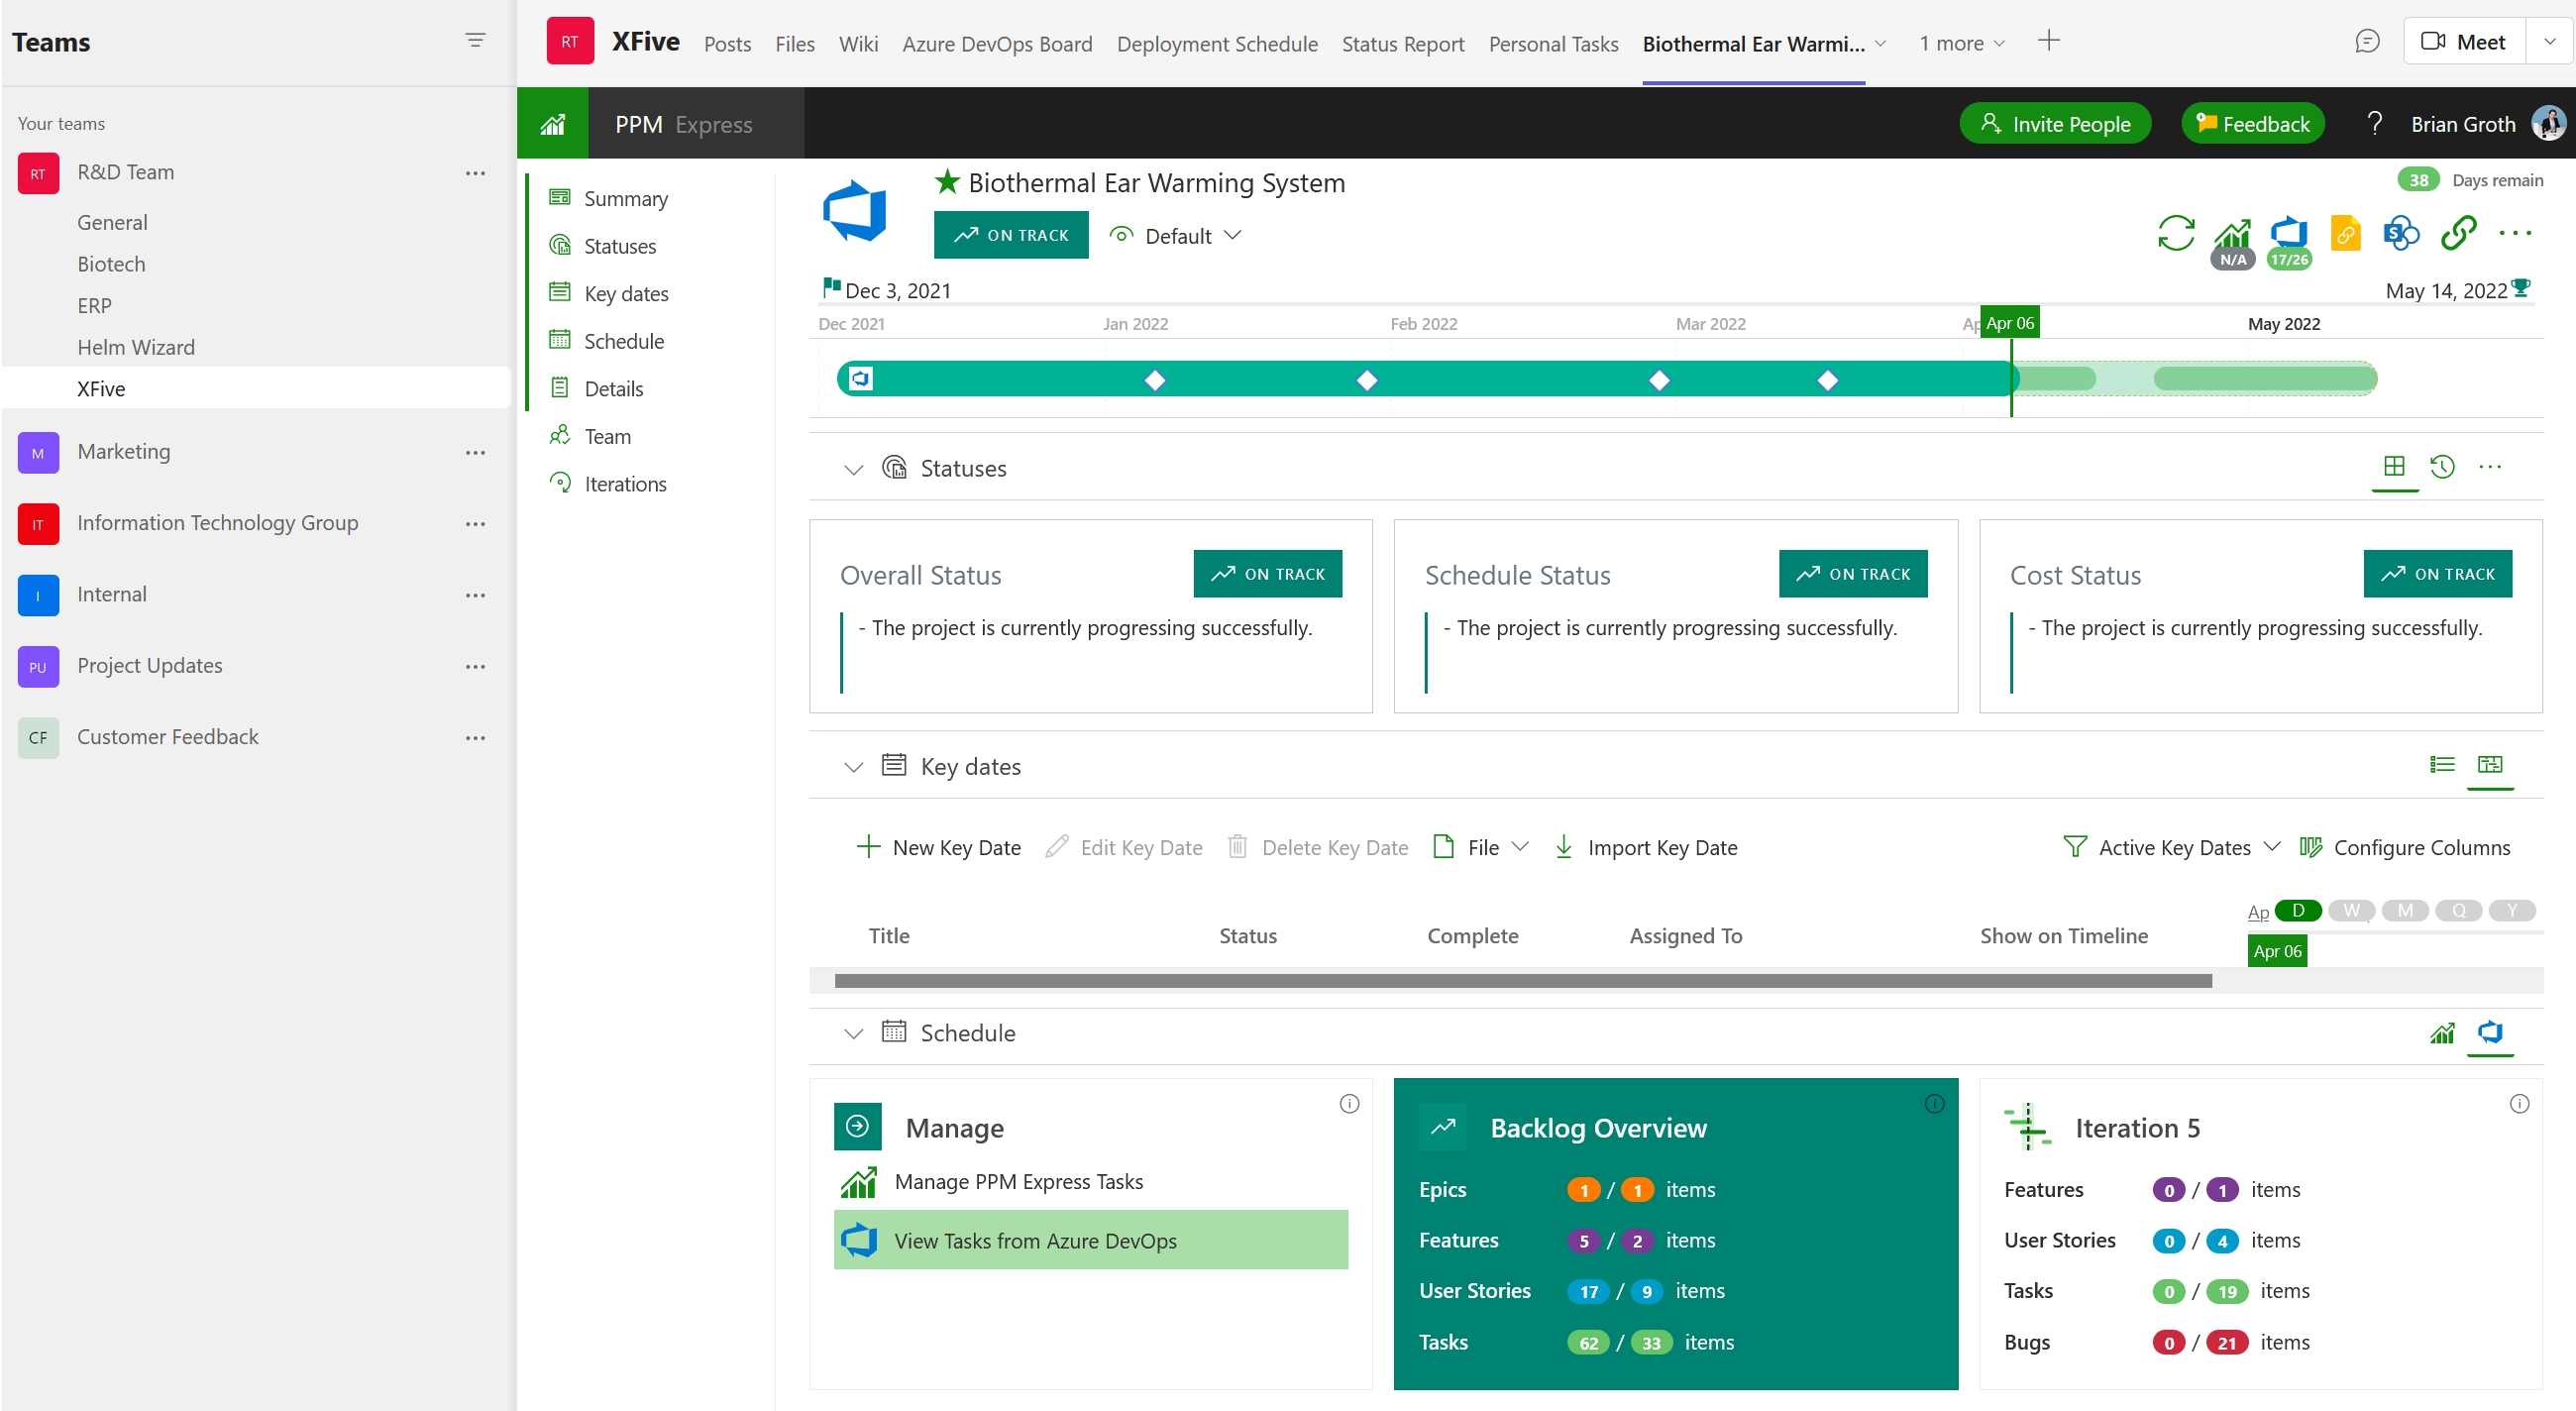 ppm express integration with Microsoft teams dashboard view